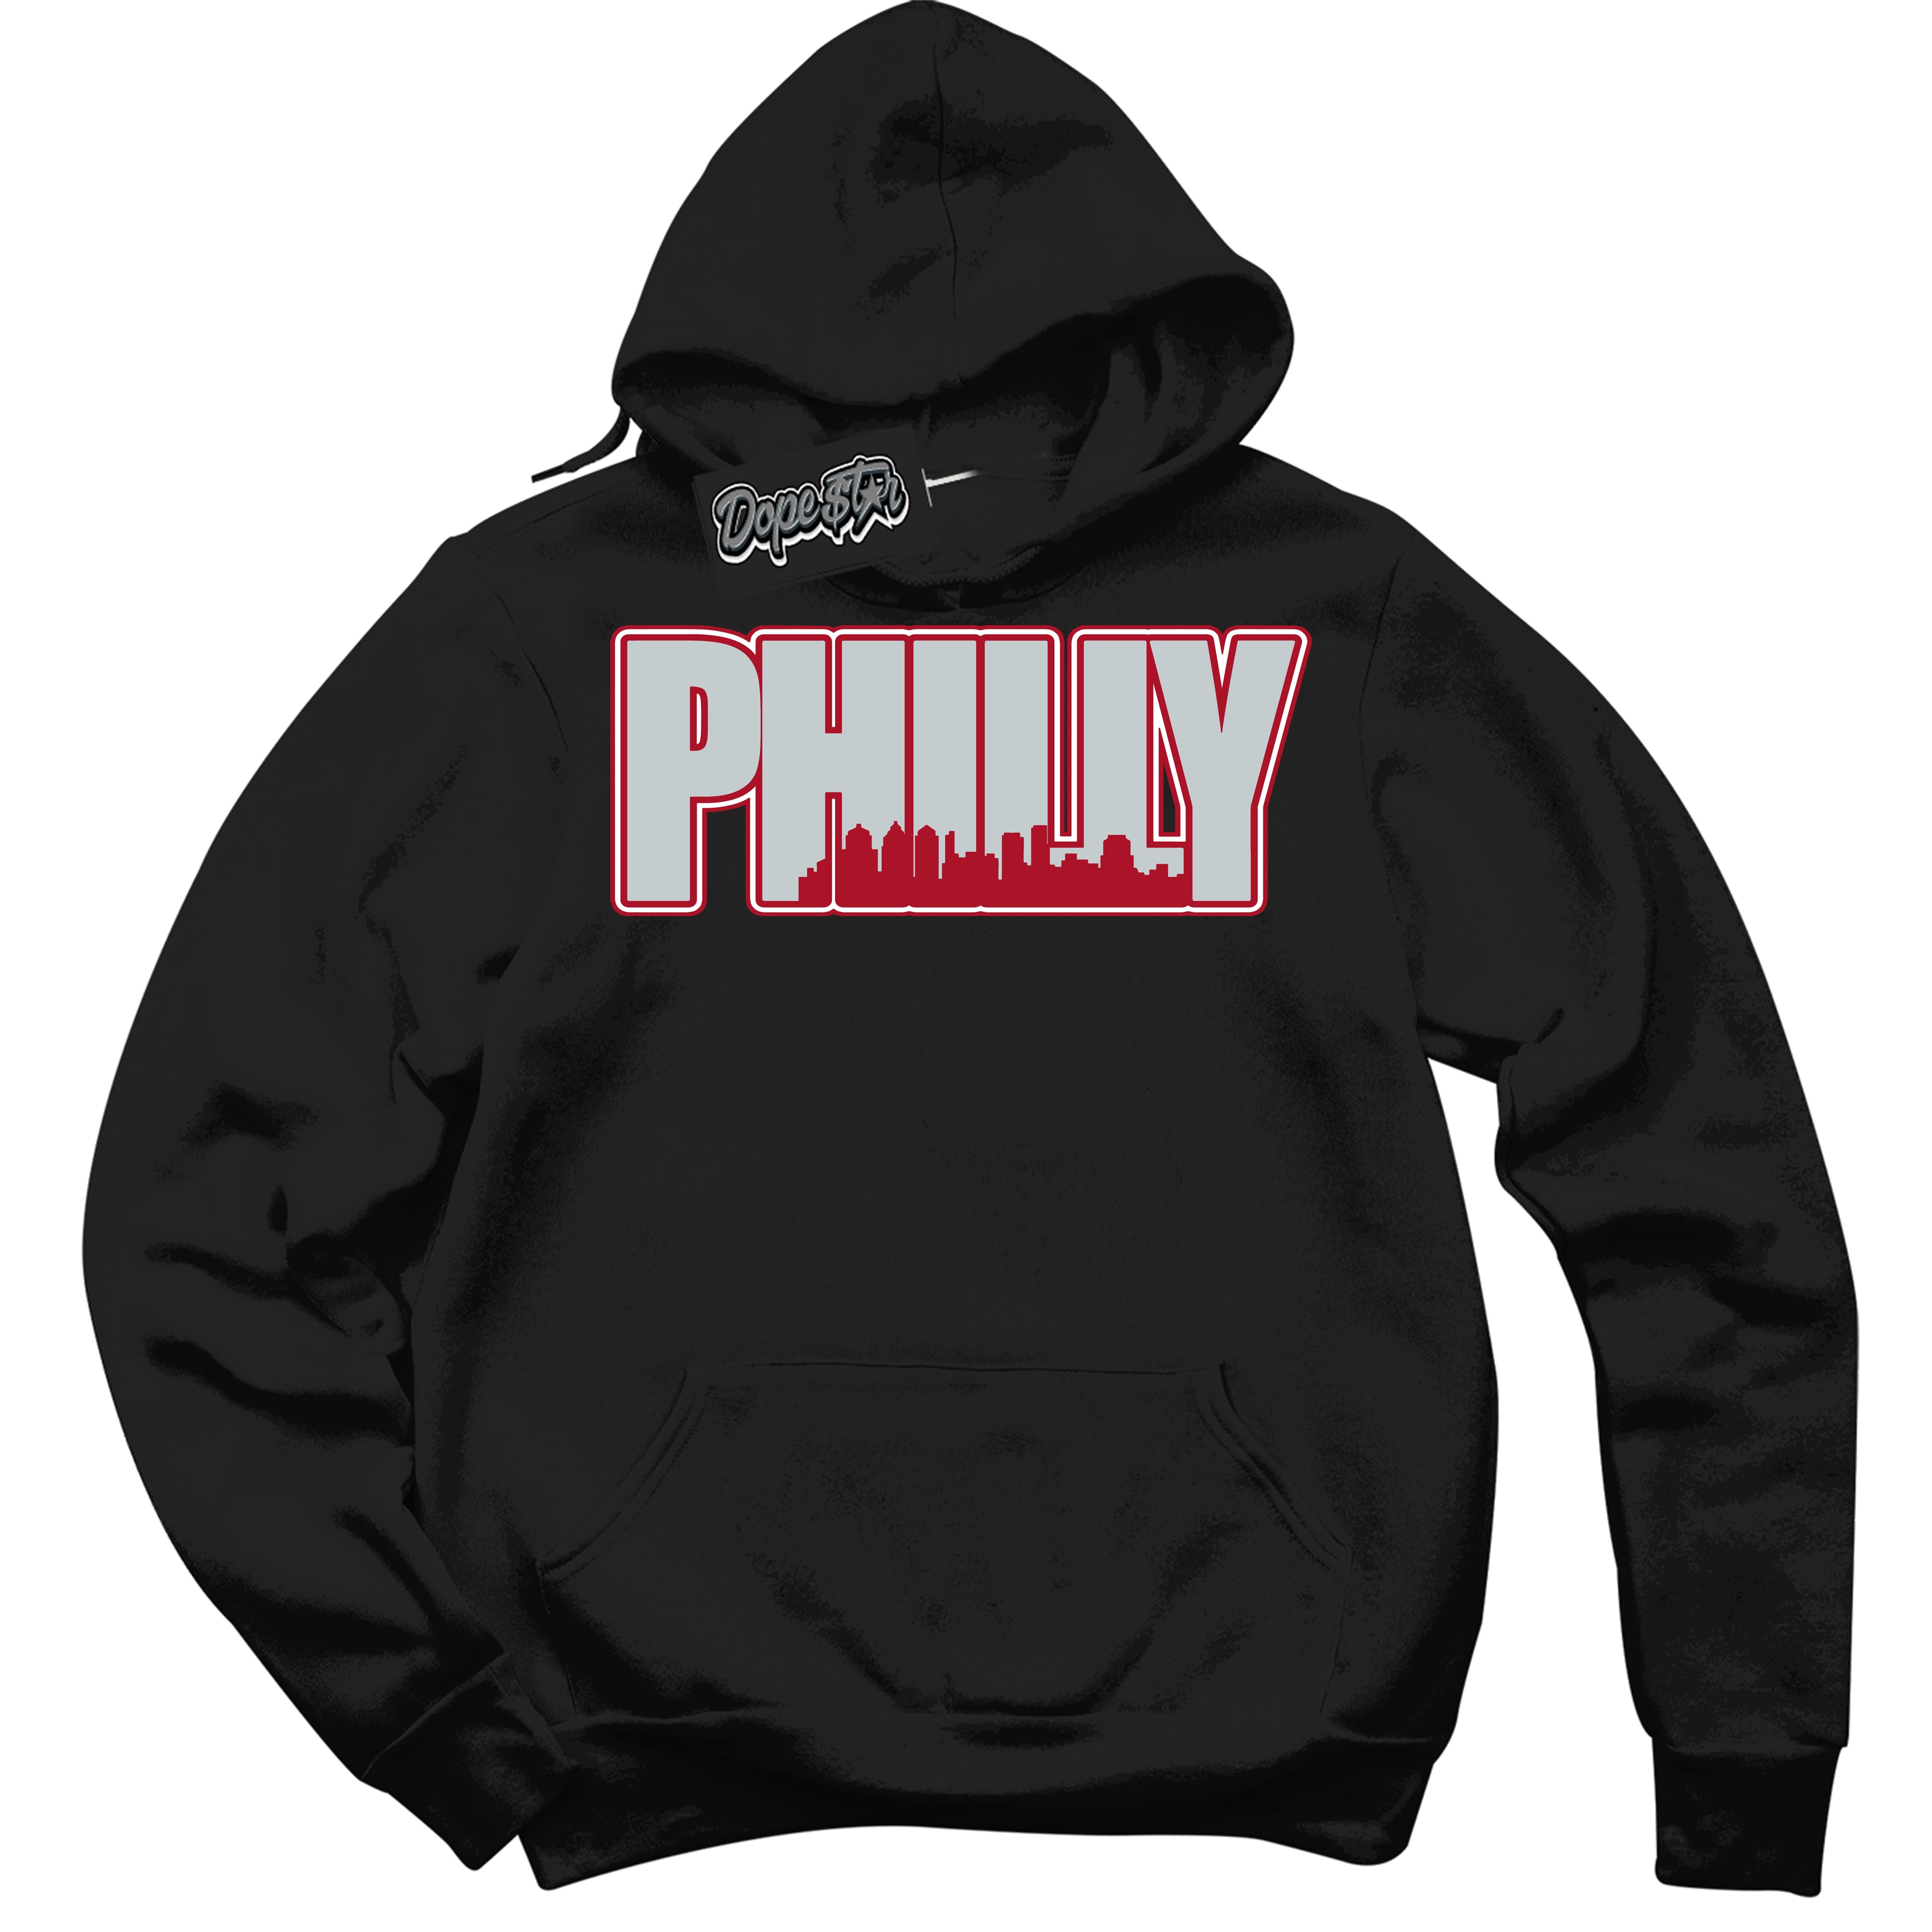 Cool Black Hoodie with “ Philly ”  design that Perfectly Matches  Reverse Ultraman Sneakers.